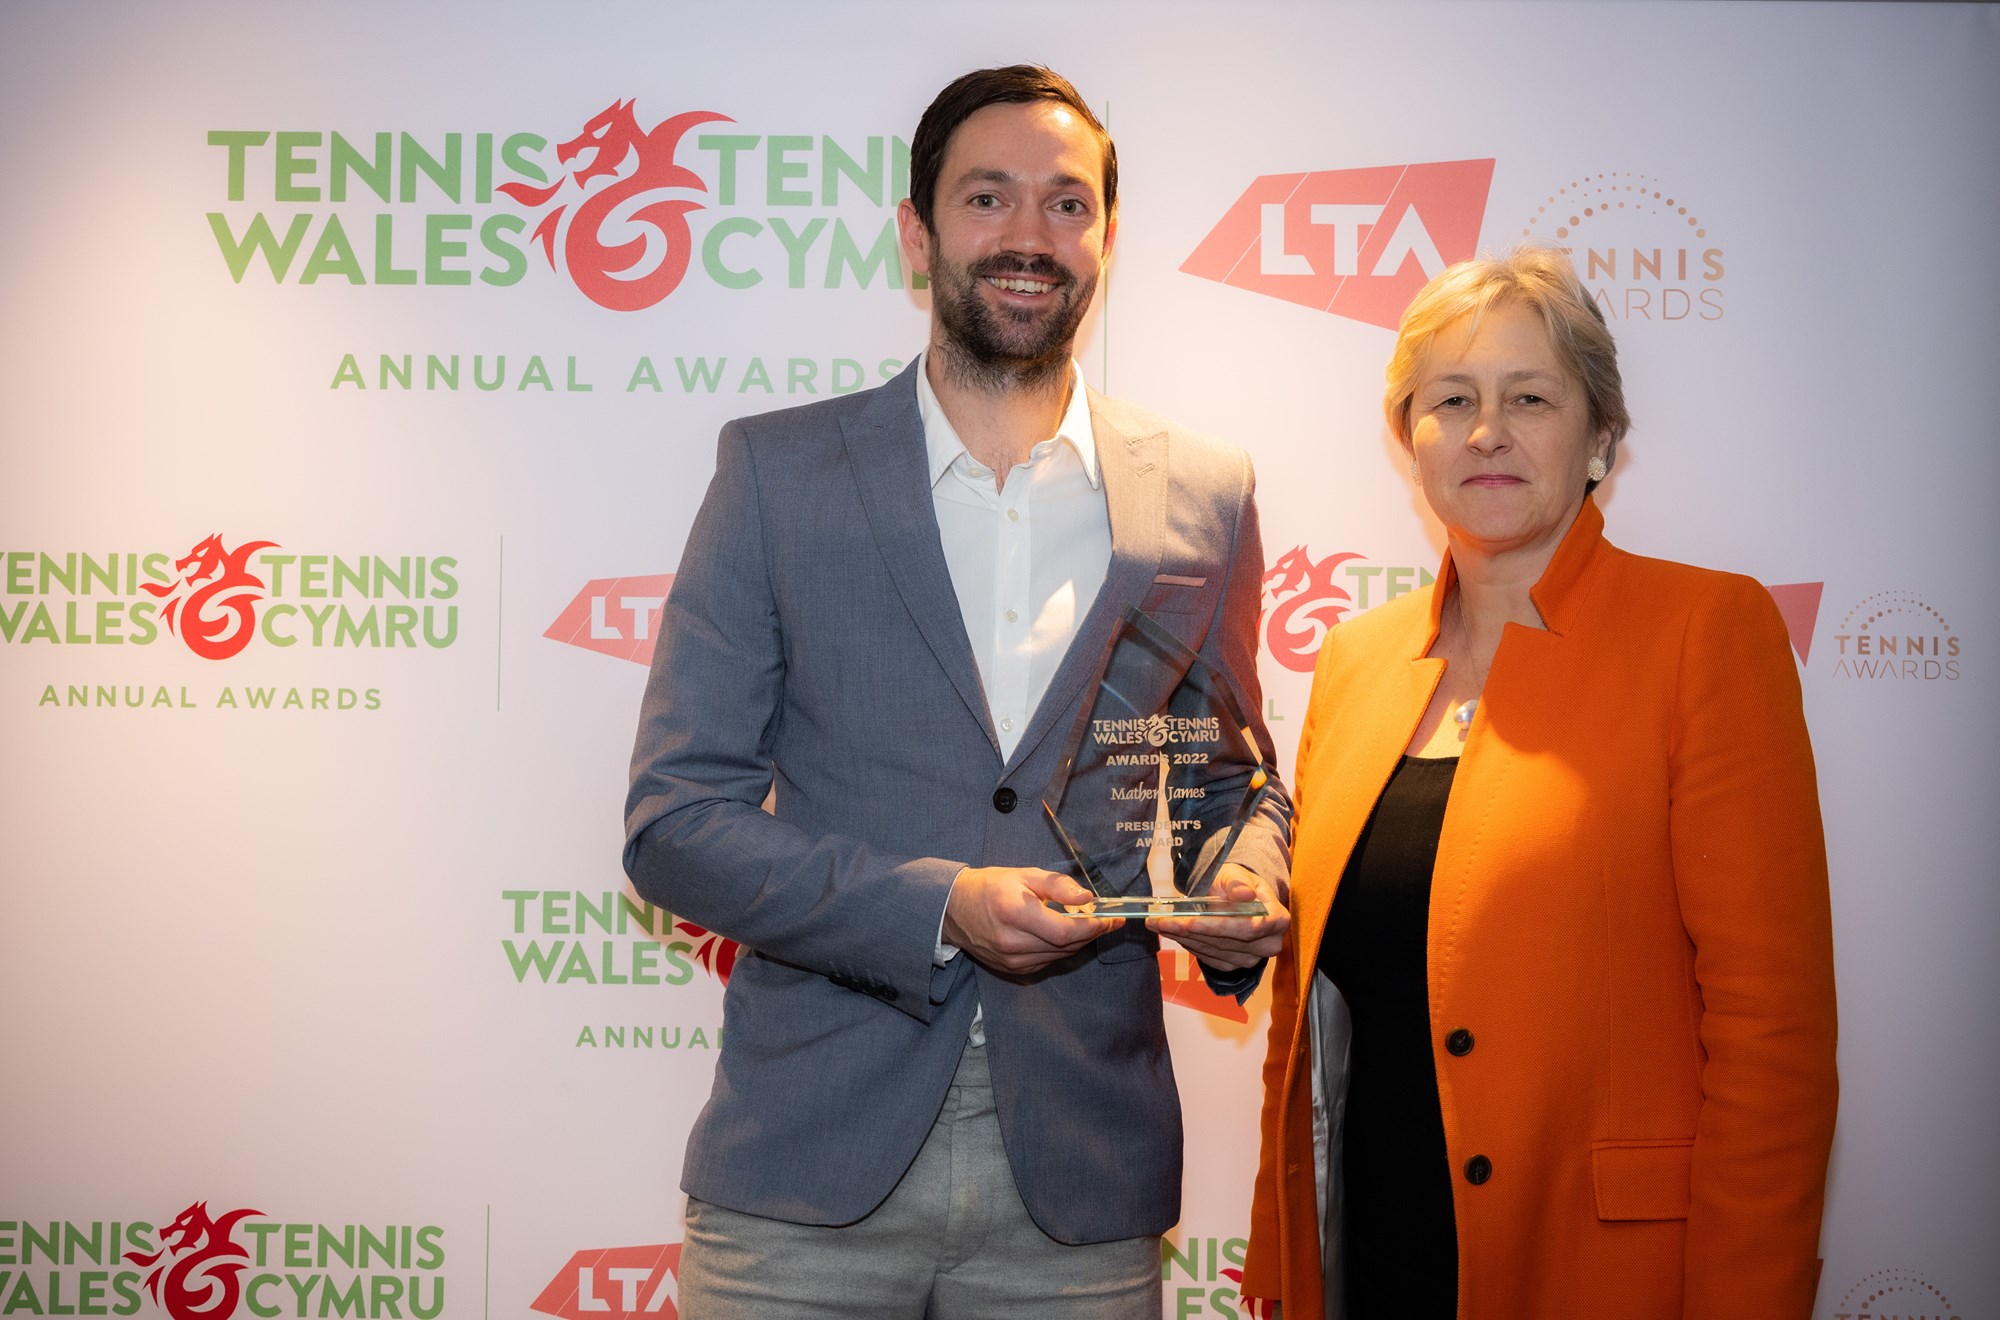 Award being handed over to a male tennis player at tennis wales